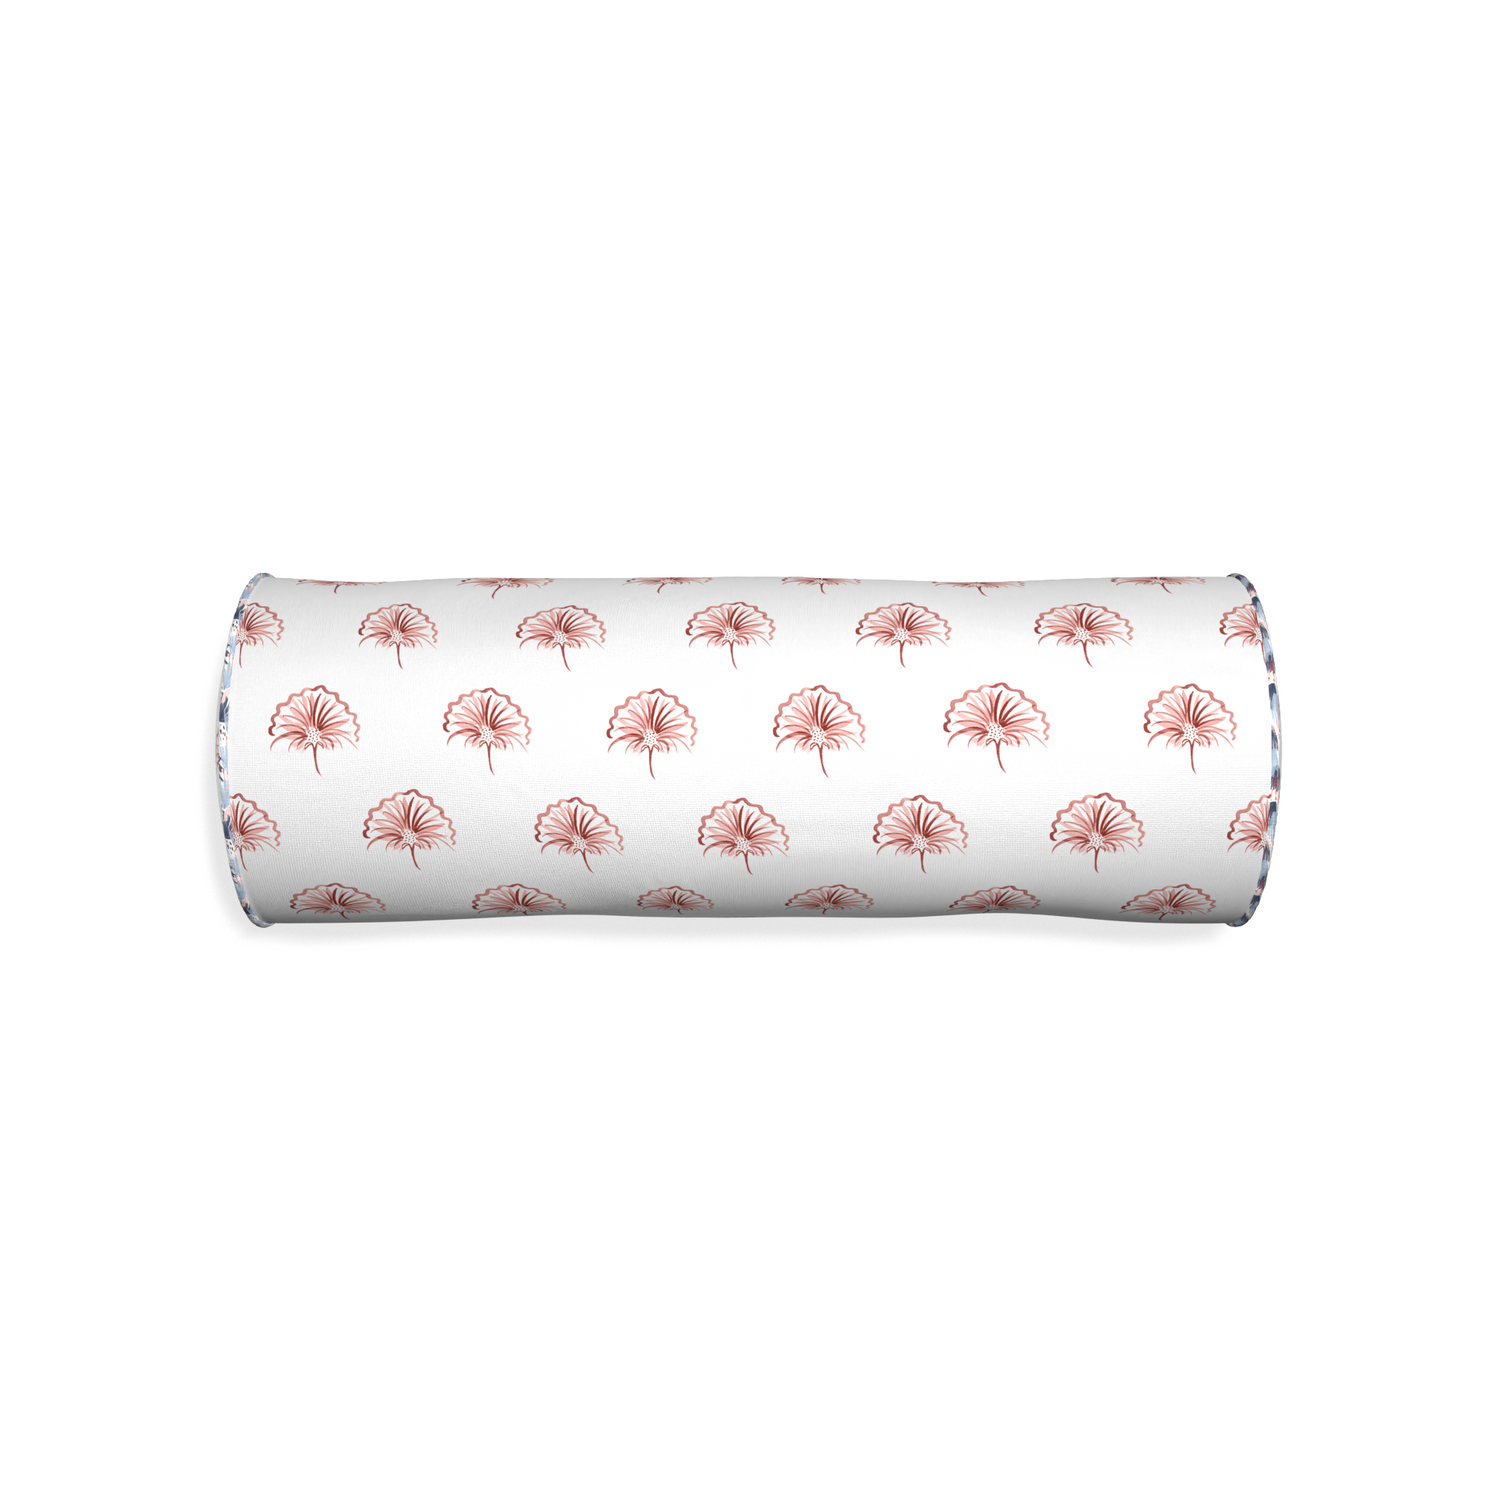 Bolster penelope rose custom floral pinkpillow with e piping on white background